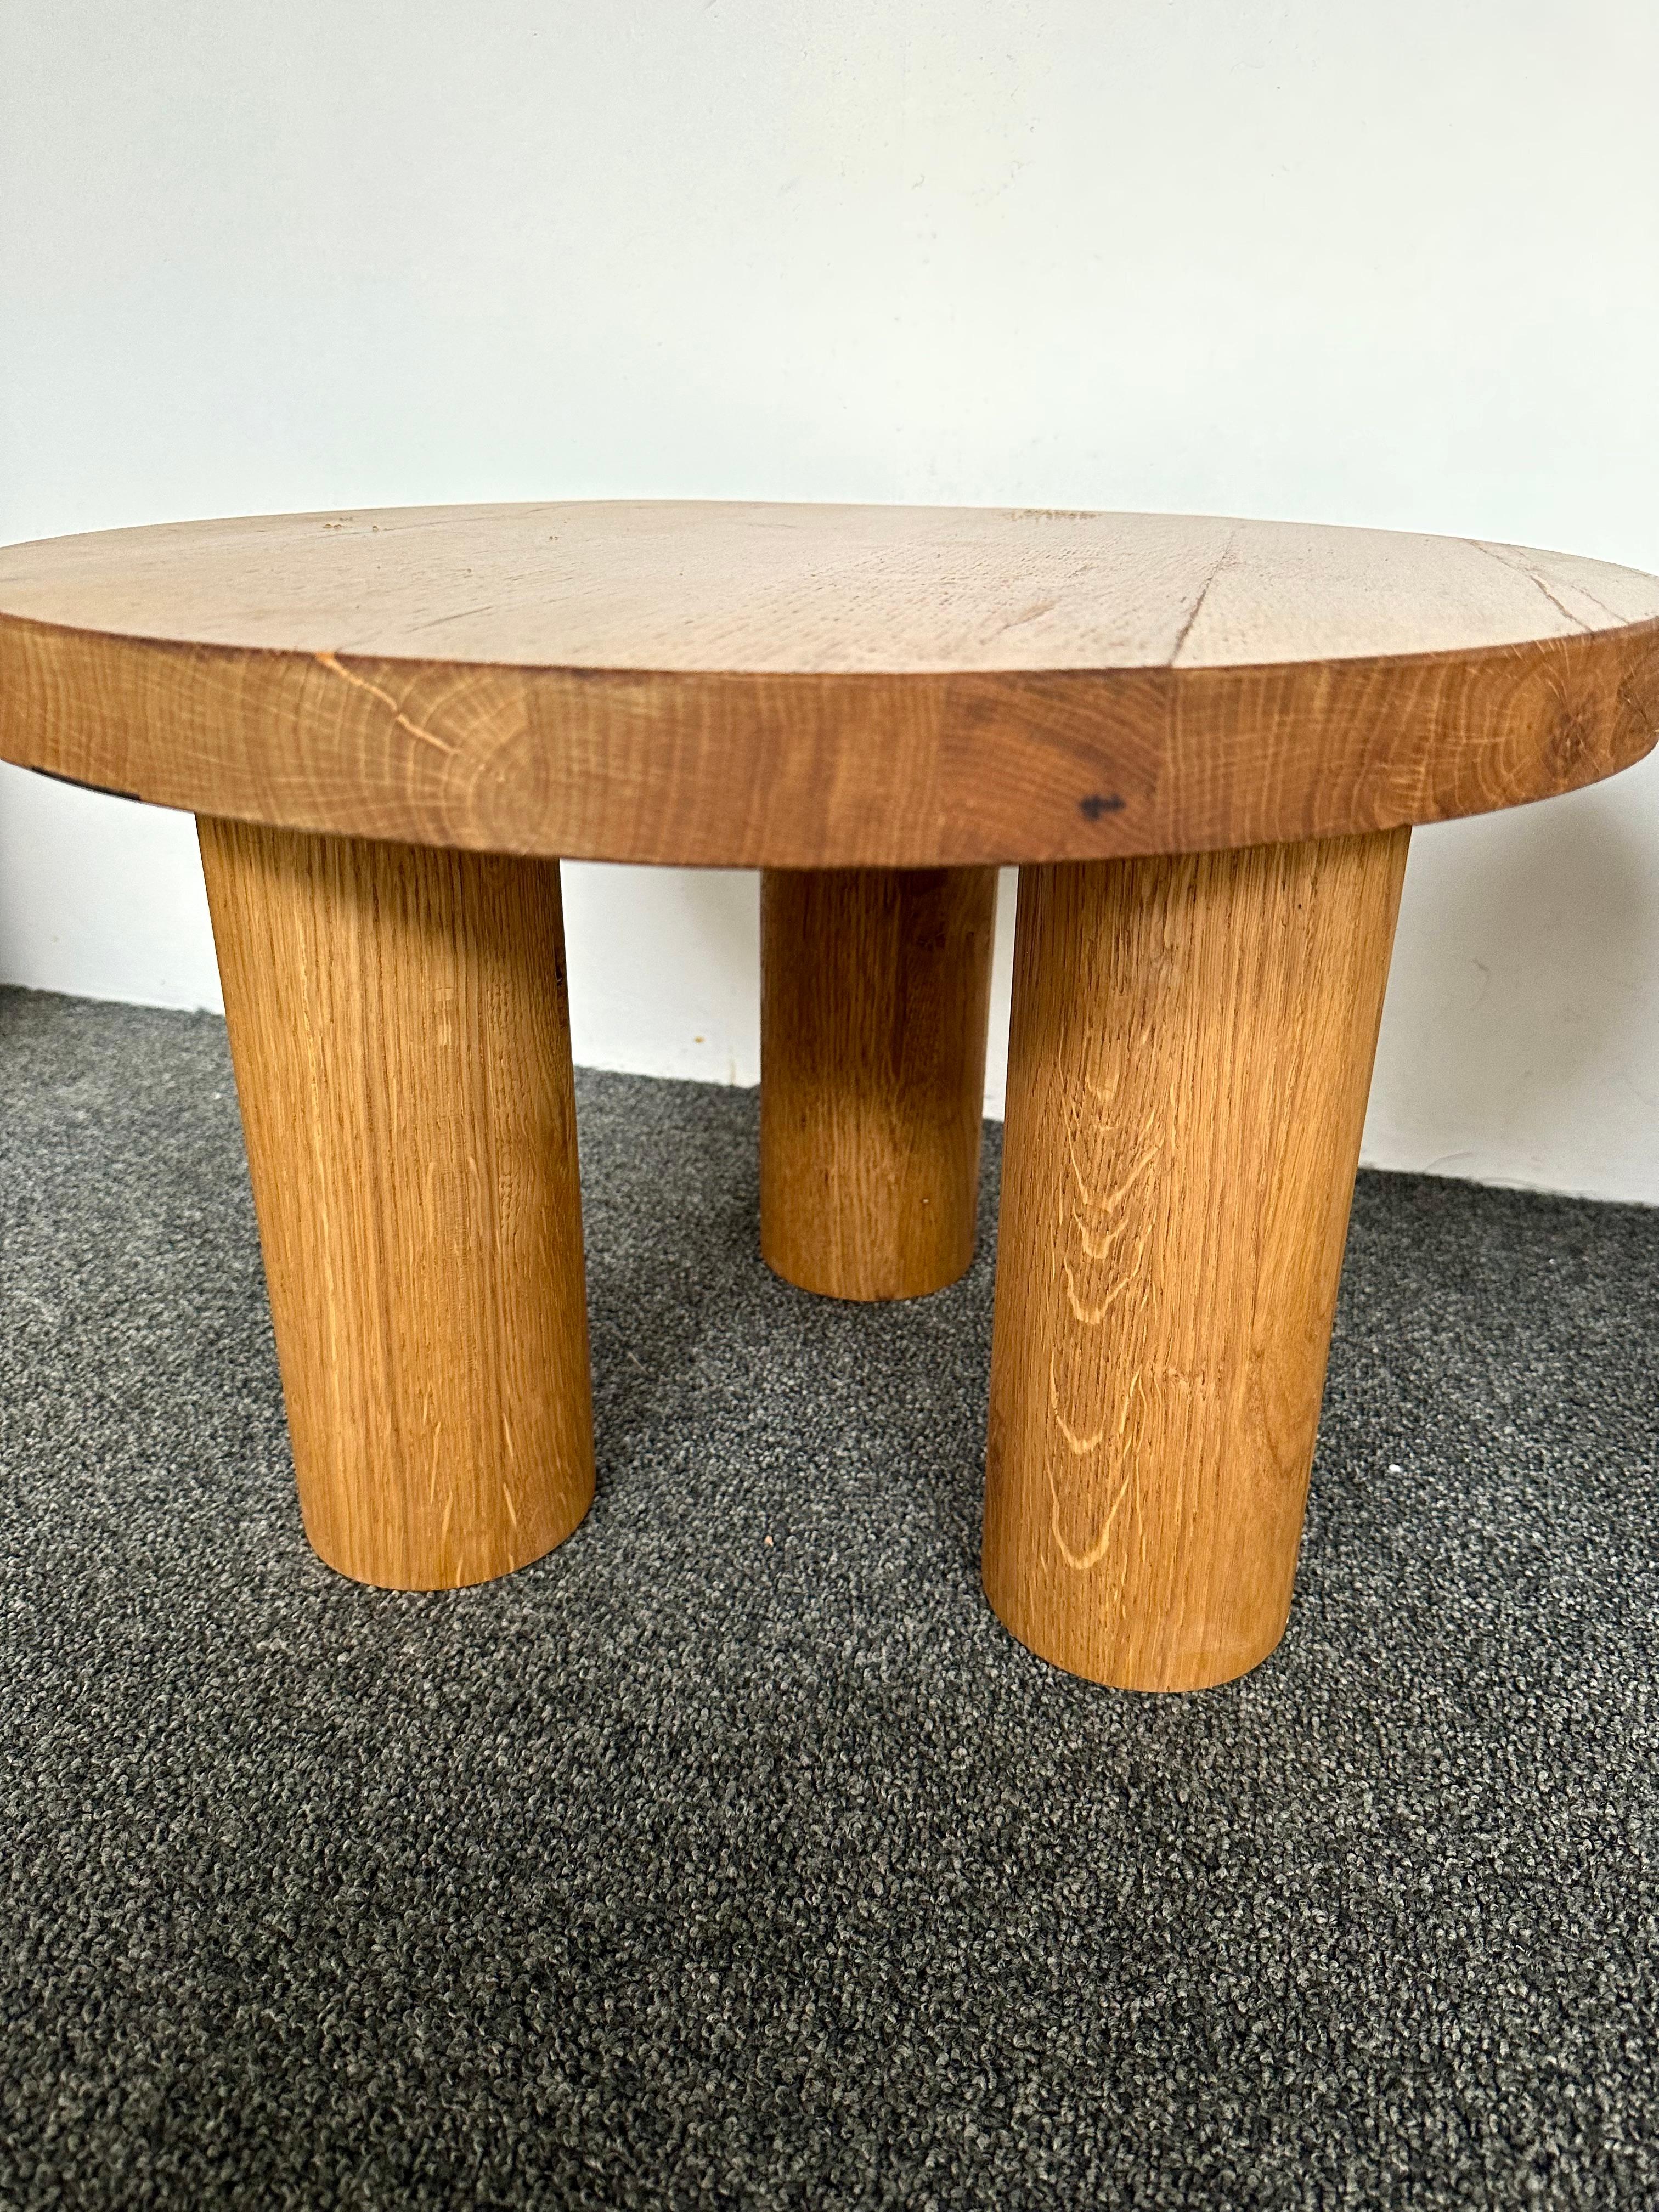 Mid-20th Century Pair of Massive Elm Wood Side Tables. France, 1960s For Sale